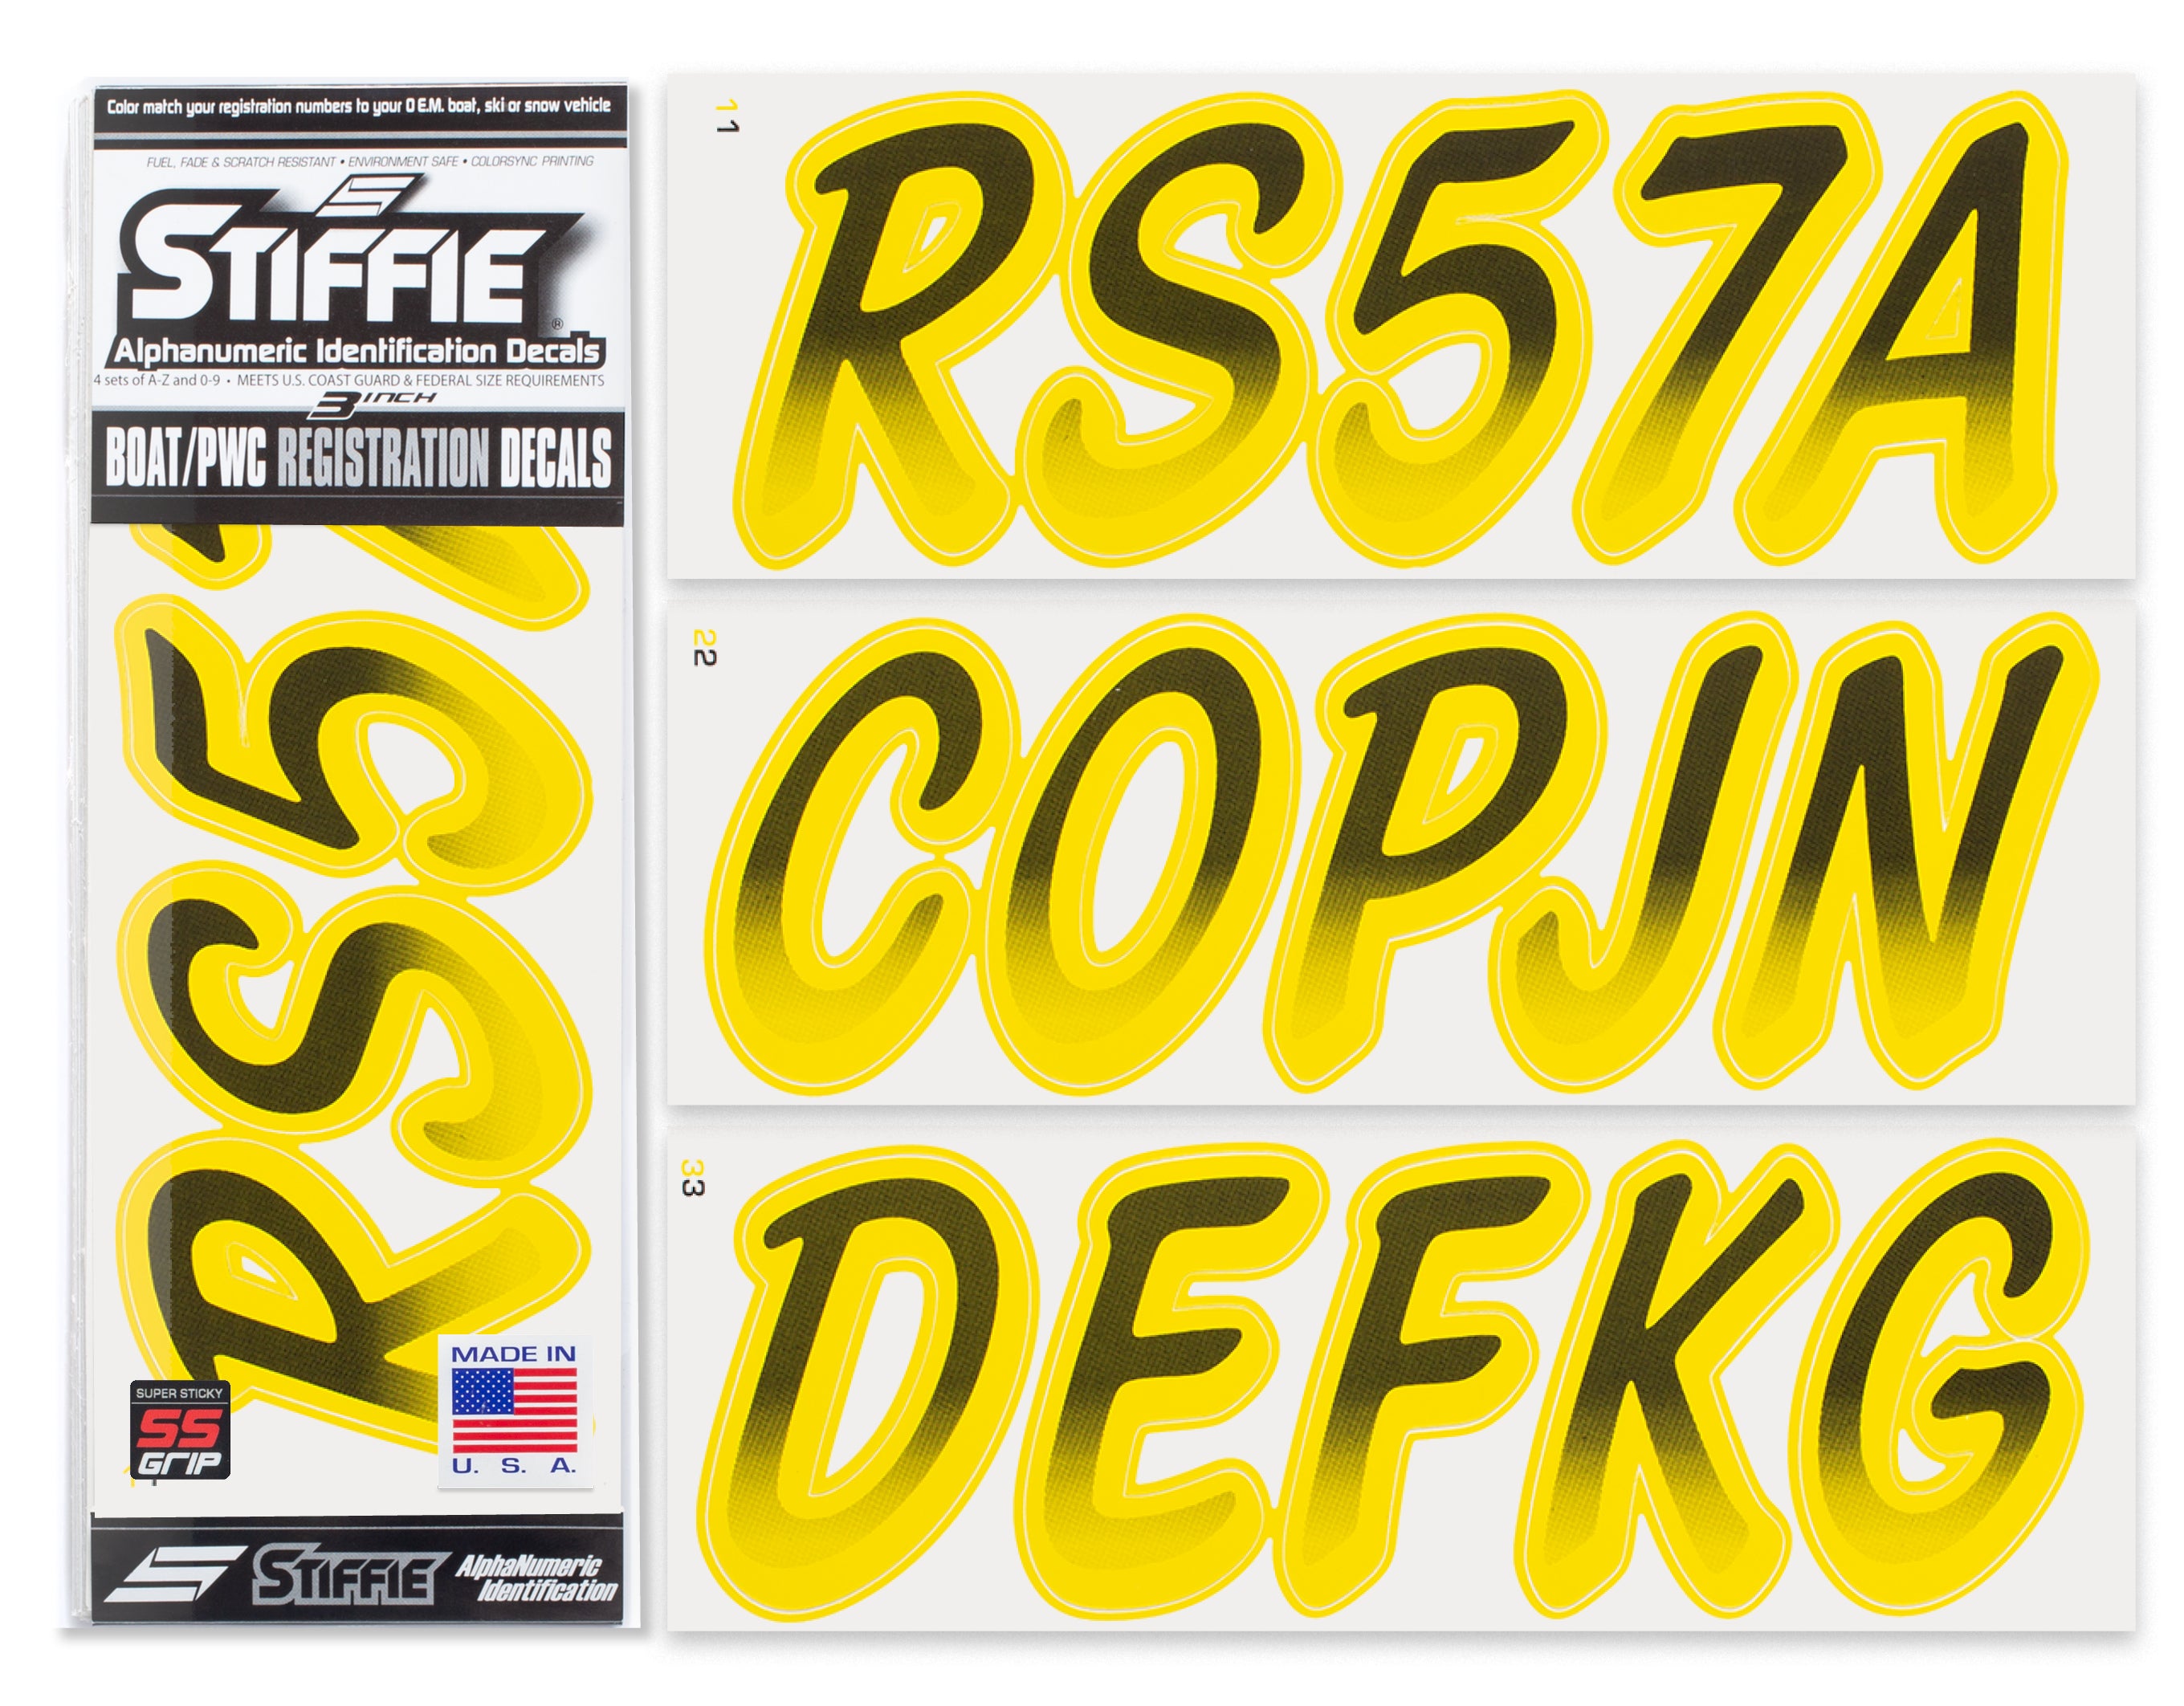 STIFFIE Whipline Black/Yellow Crush Super Sticky 3" Alpha Numeric Registration Identification Numbers Stickers Decals for Sea-Doo Spark, Inflatable Boats, Ribs, Hypalon/PVC, PWC and Boats